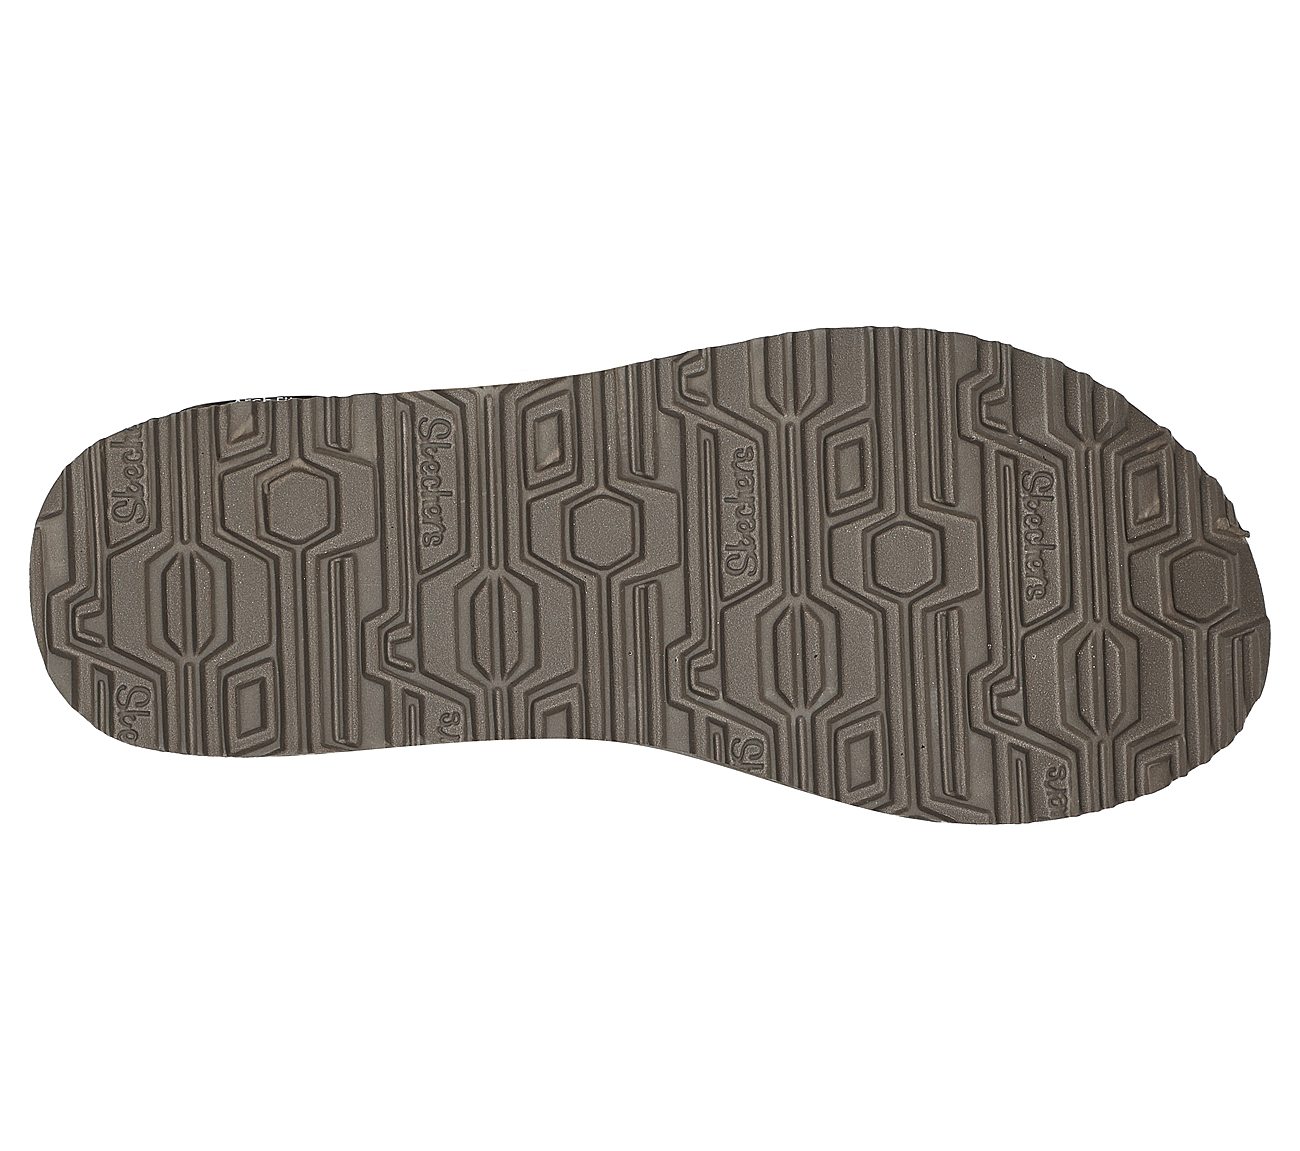 ARCH FIT MEDITATION, TAUPE/MULTI Footwear Bottom View